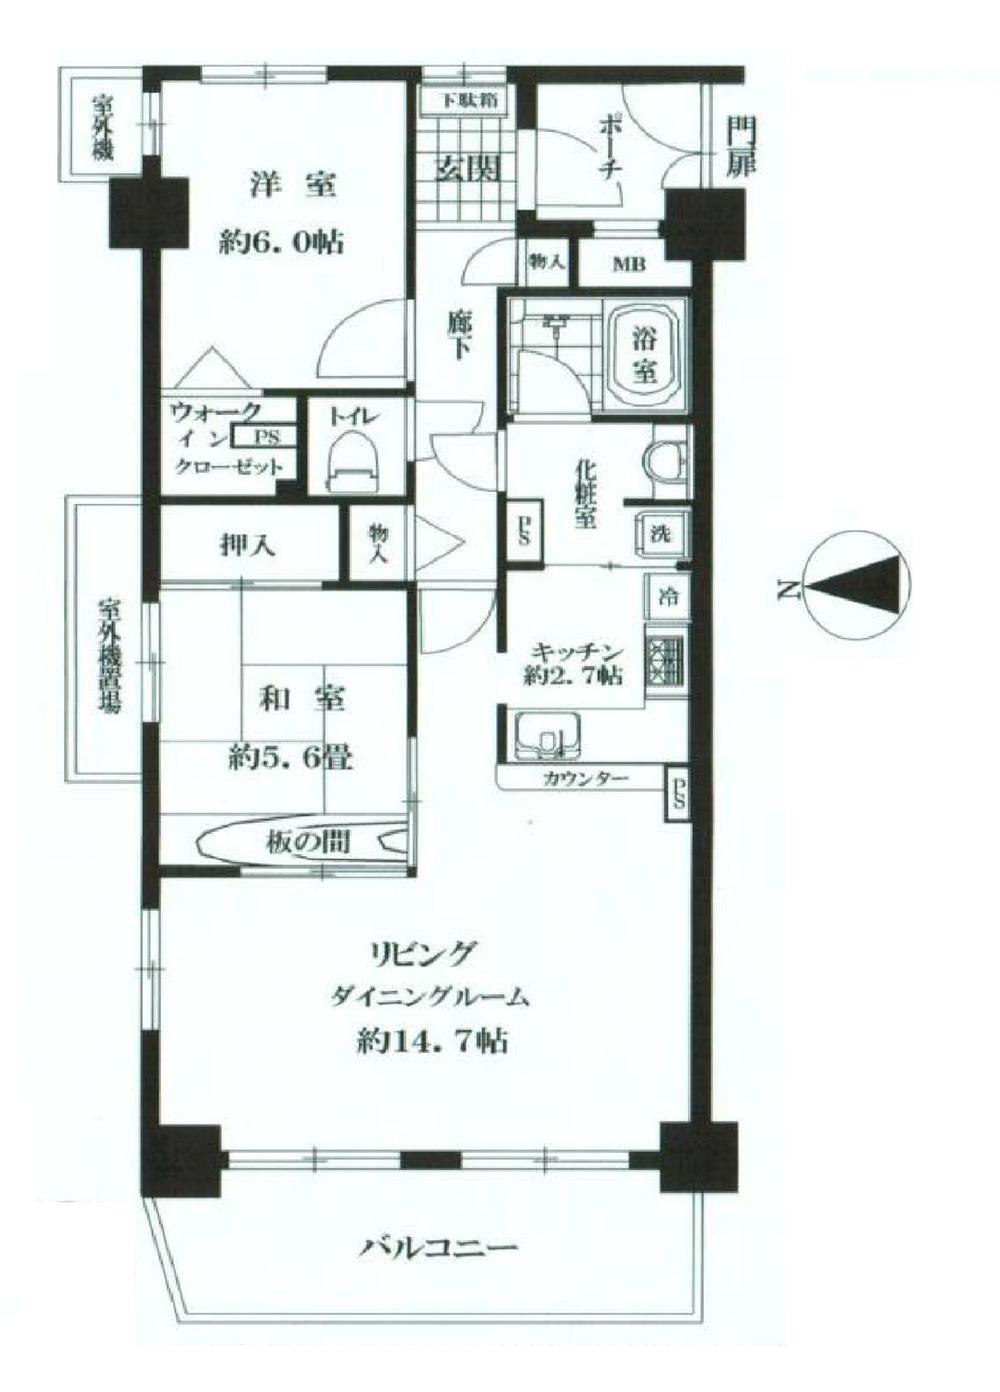 Floor plan. 2LDK, Price 18.9 million yen, Occupied area 68.44 sq m , Balcony area 7.29 sq m ◎ LDK17 quires more ◎ 2WAY kitchen ◎ two-sided lighting